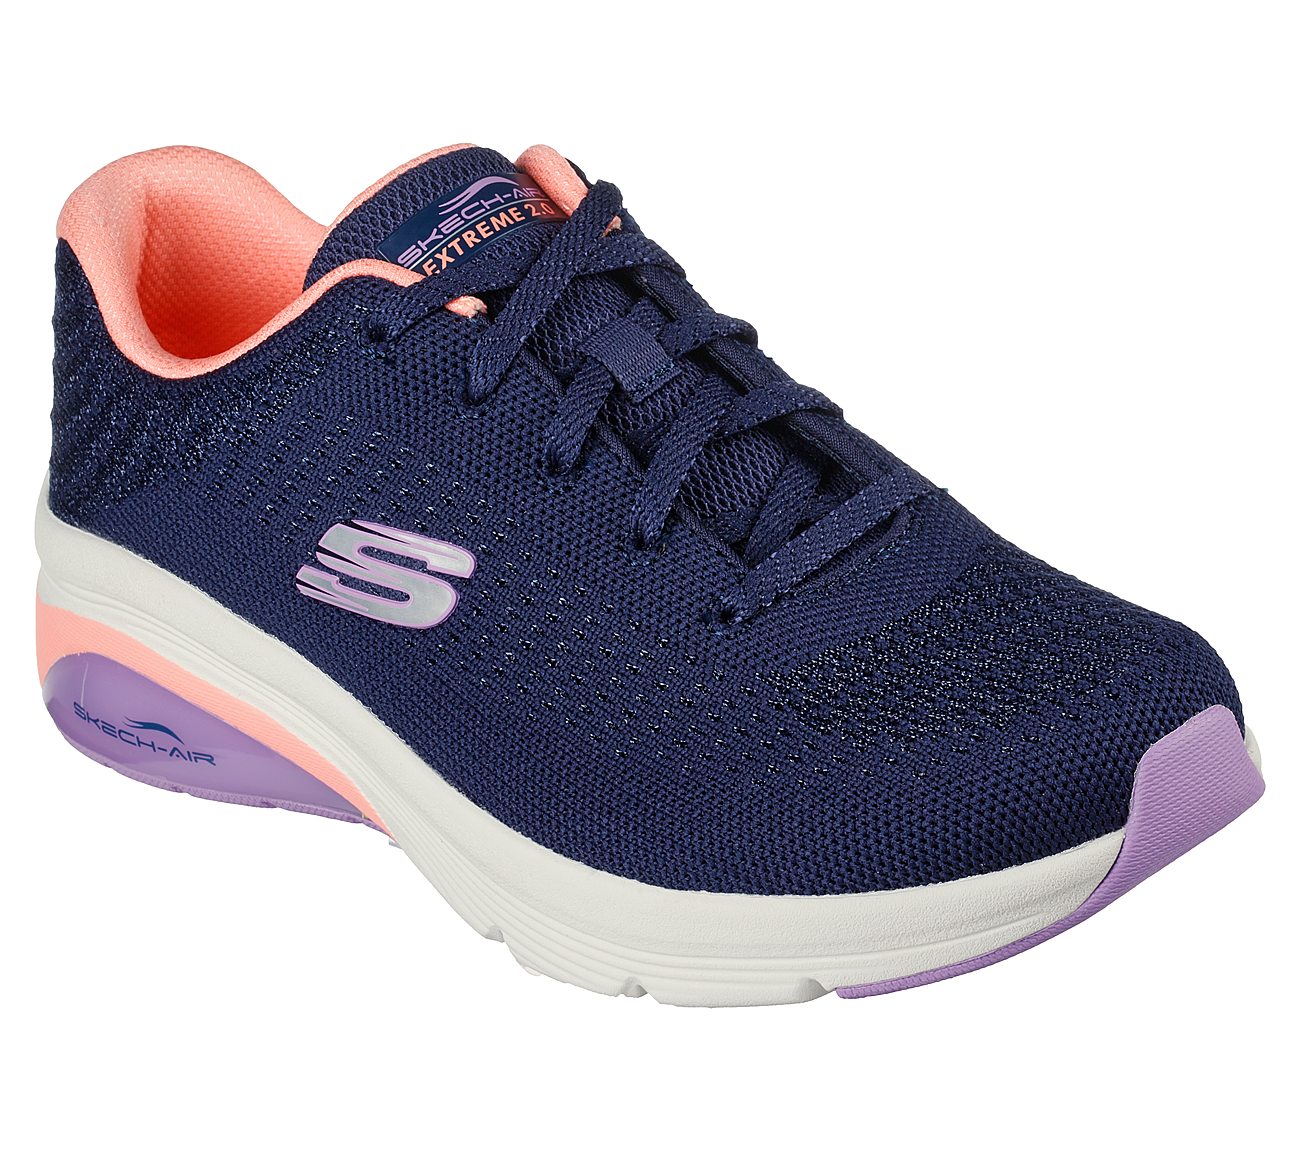 SKECH-AIR EXTREME 2.0-CLASSIC, NAVY/MULTI Footwear Lateral View